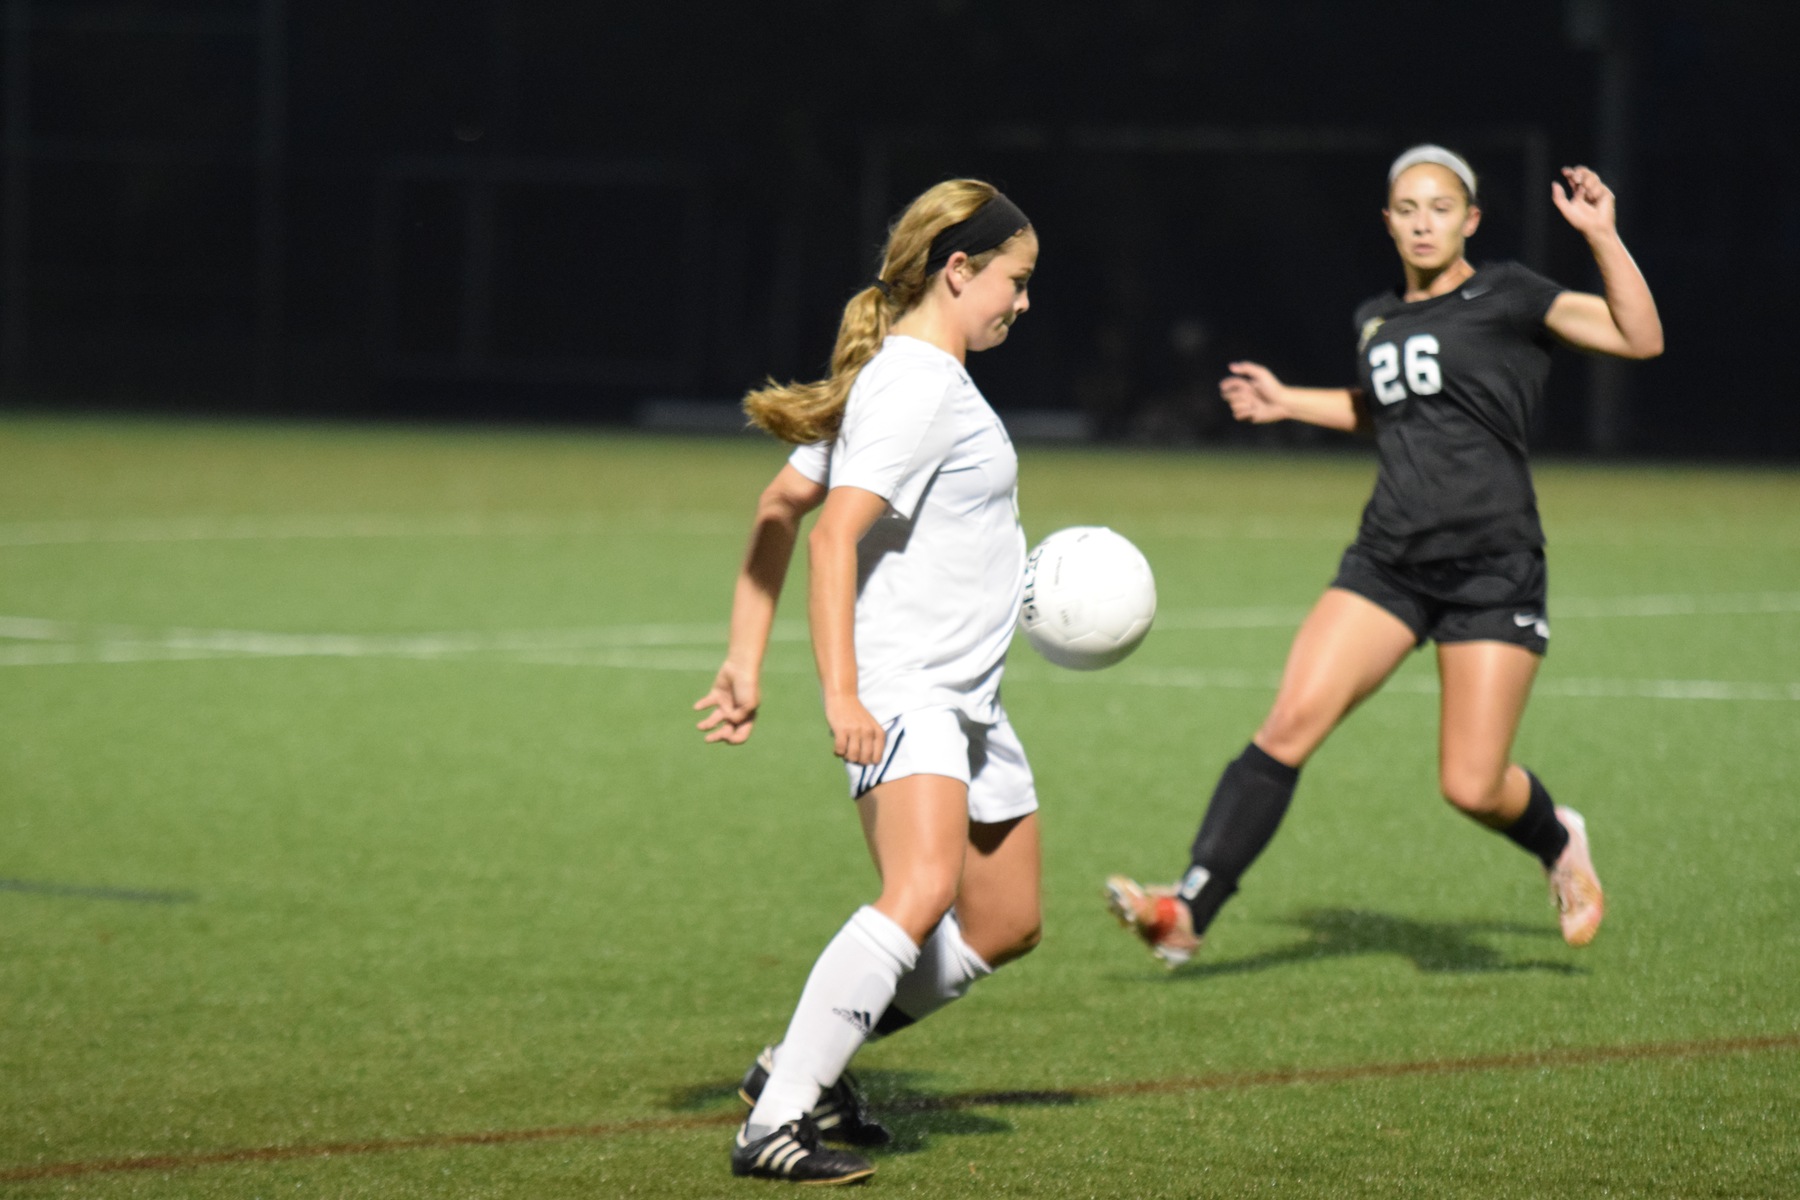 Lynx Draw 1-1 to Emerson in Sixth Annual Charles River Cup